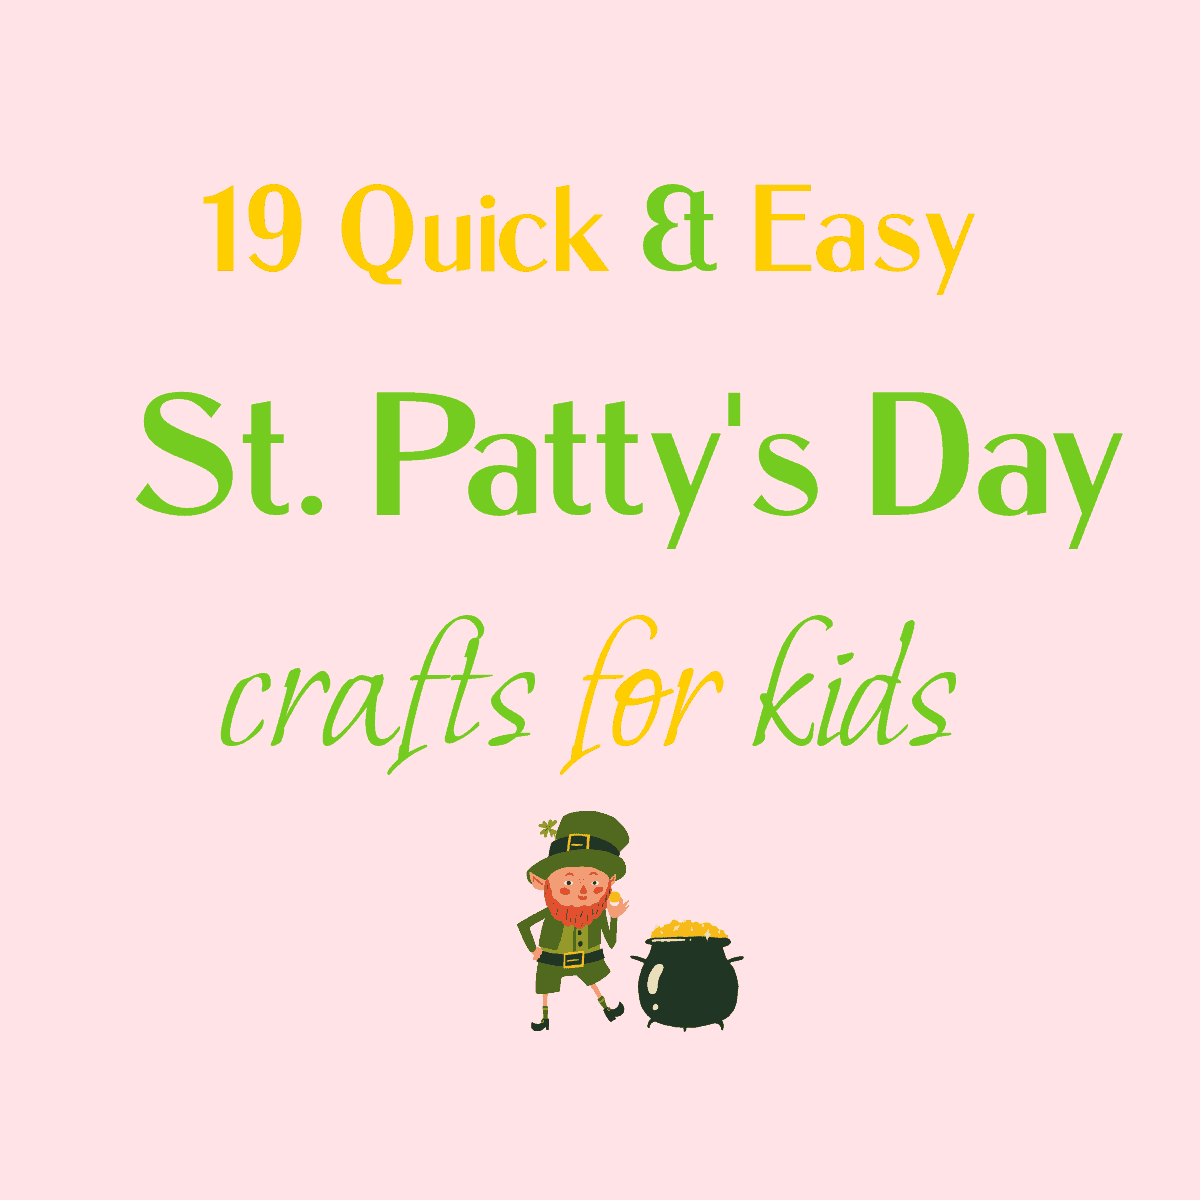 19 Quick & Easy St. Patrick's Day Crafts For Kids